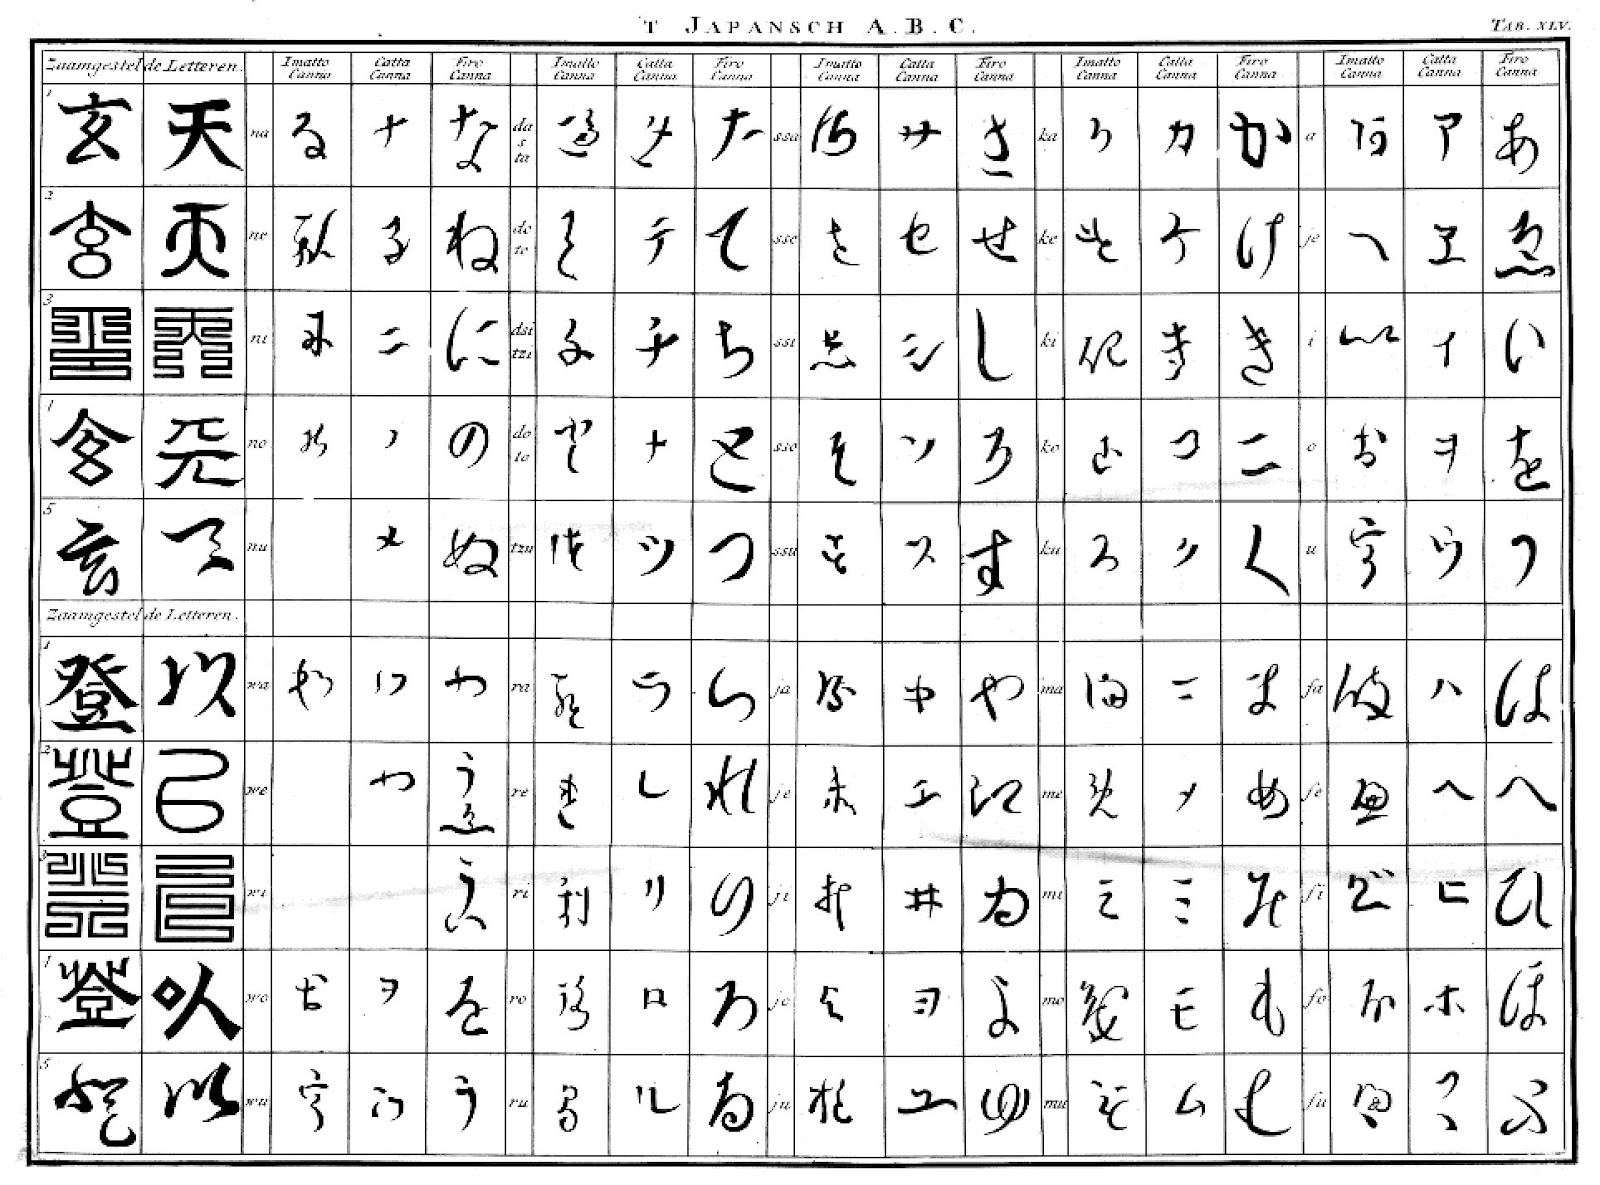 The Polyglot Blog: Japanese Alphabet and Charts in Photos